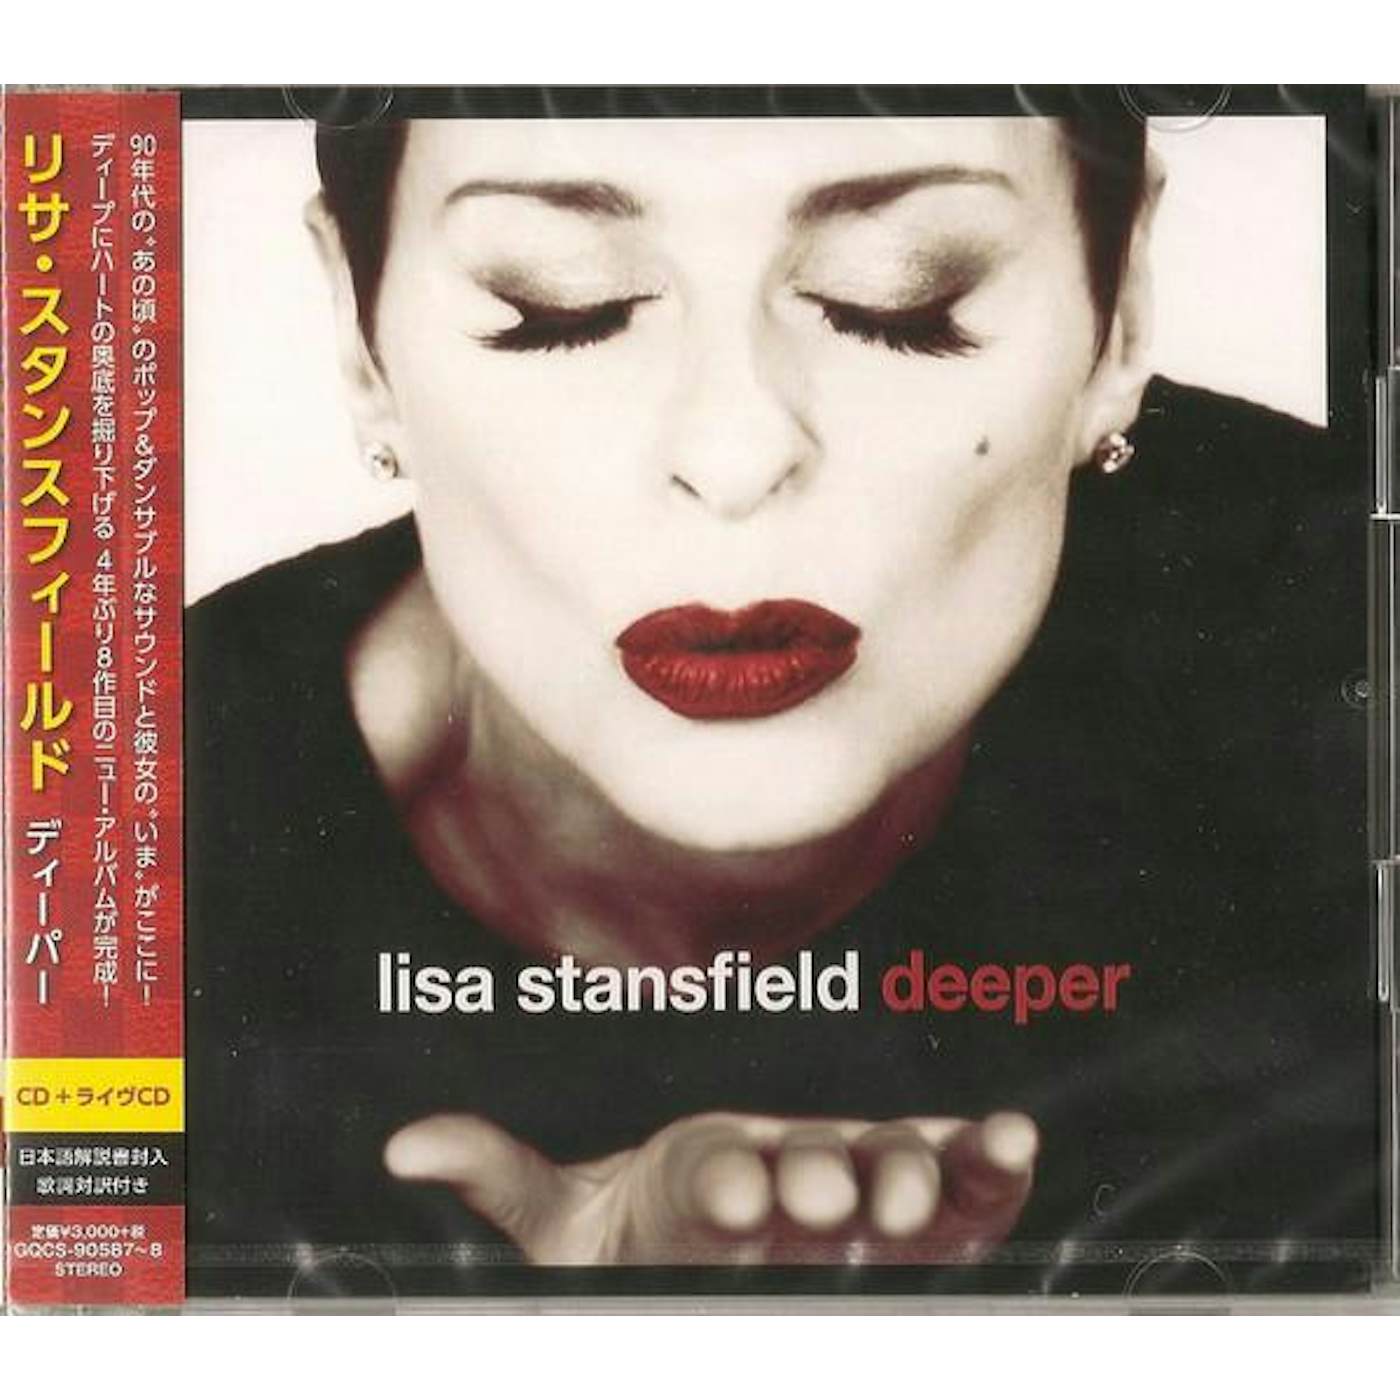 Lisa Stansfield DEEPER (LIMITED DELUXE EDITION) CD